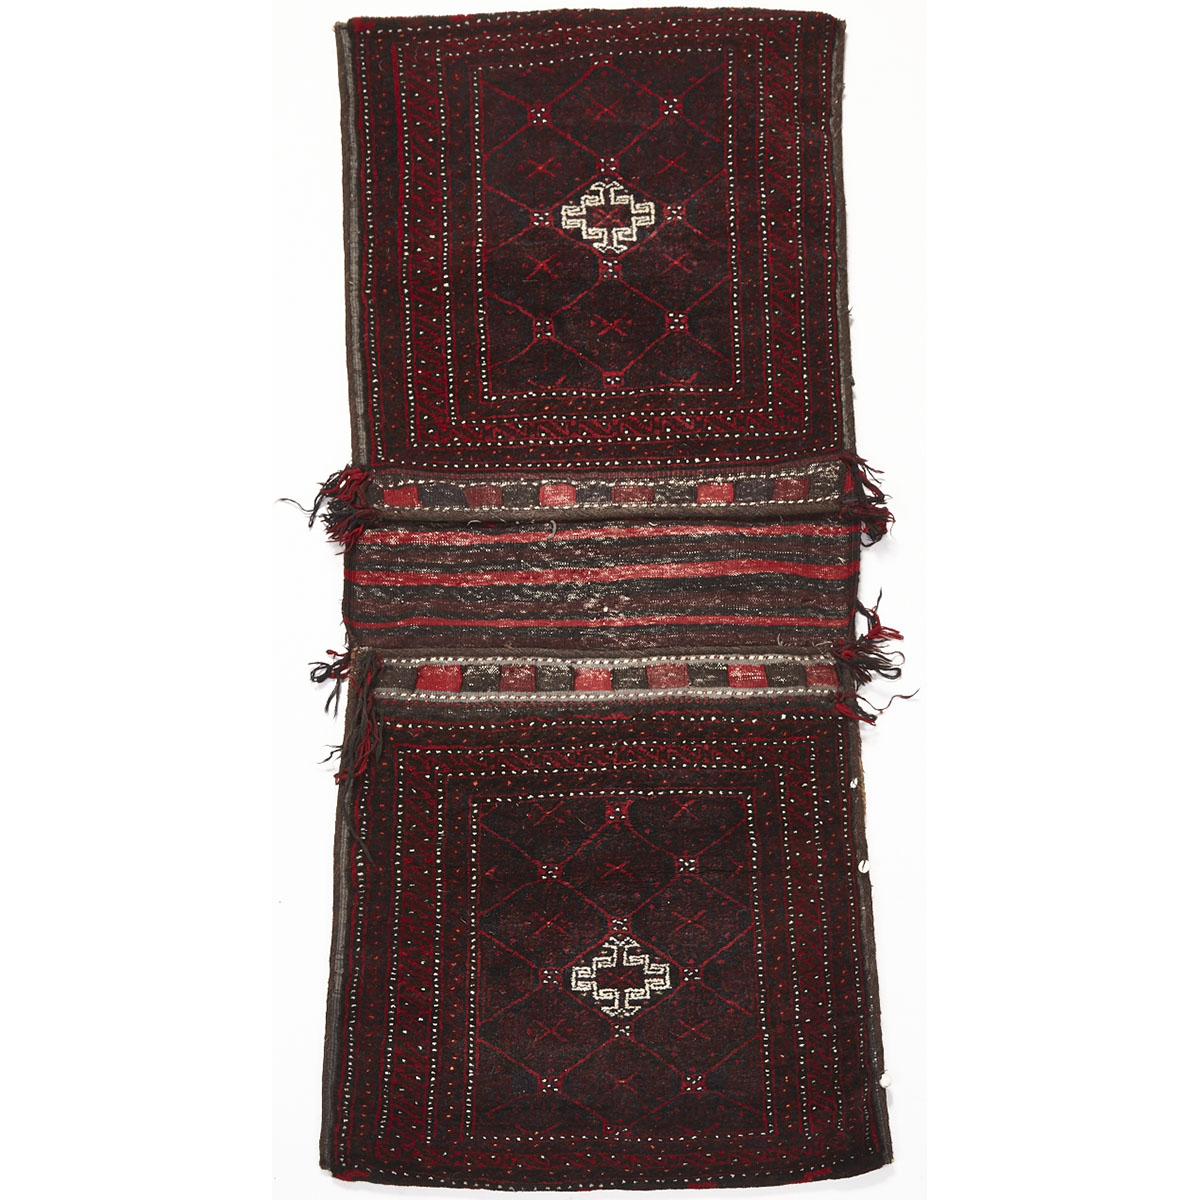 Pair of Belouchi Saddle Bags, mid./late 20th century